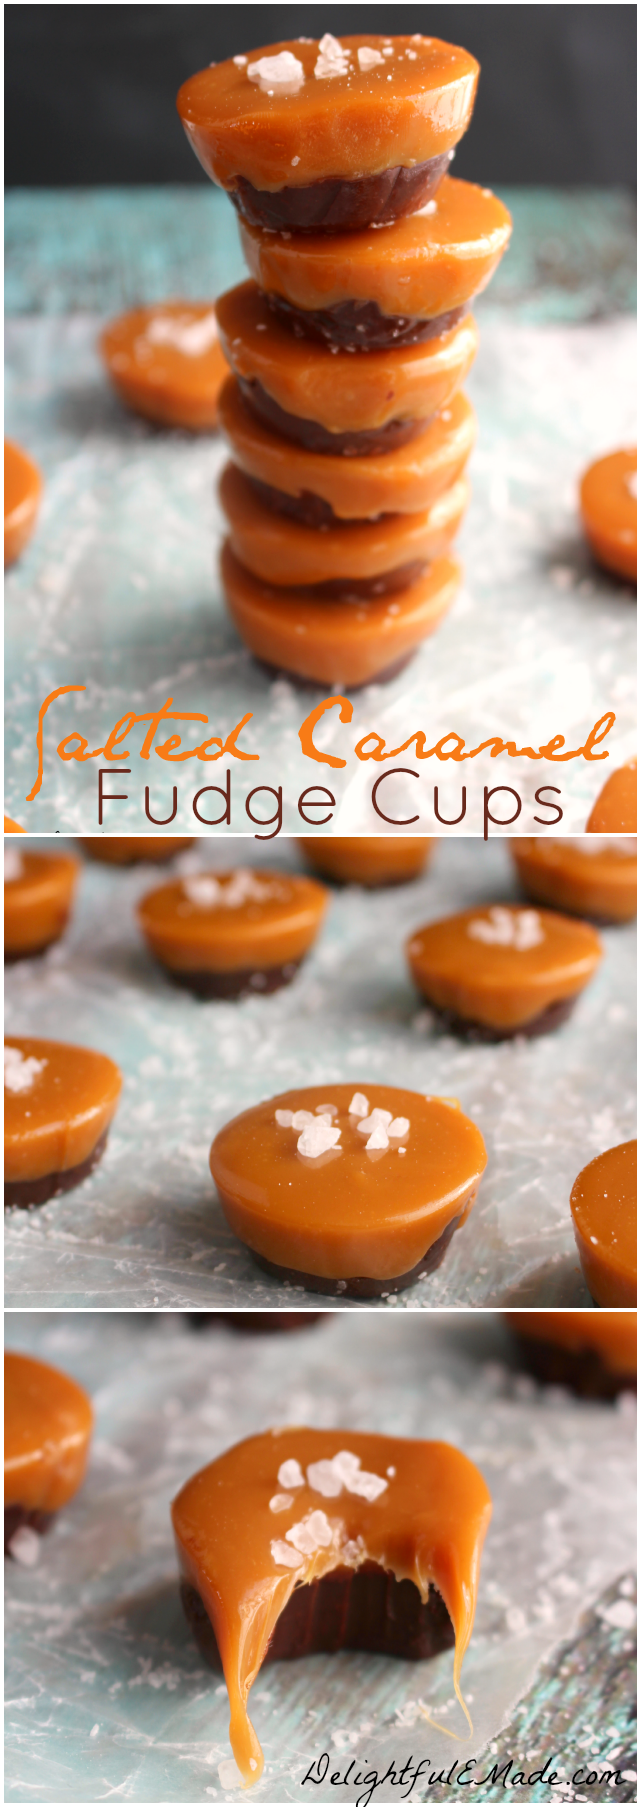 Caramel and chocolate come together to make one incredibly delicious treat! With just four ingredients, these Salted Caramel Fudge cups are soft, gooey, sweet and really easy to make!